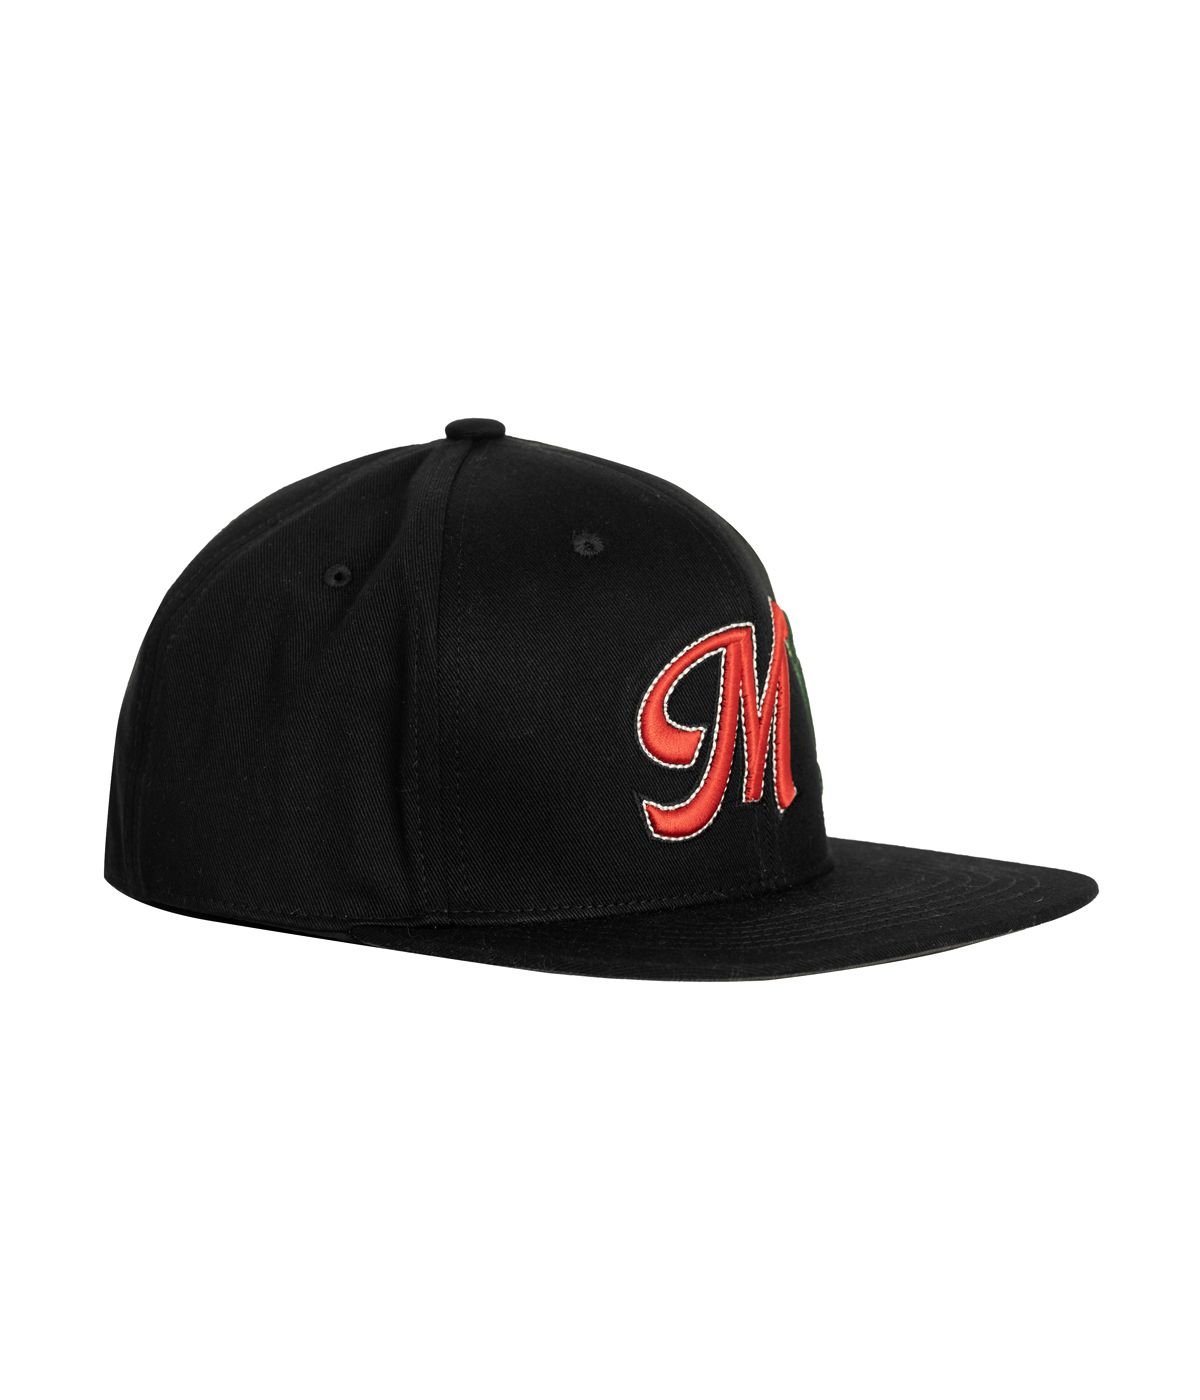  LOGO FITTED CAP / BLACK 